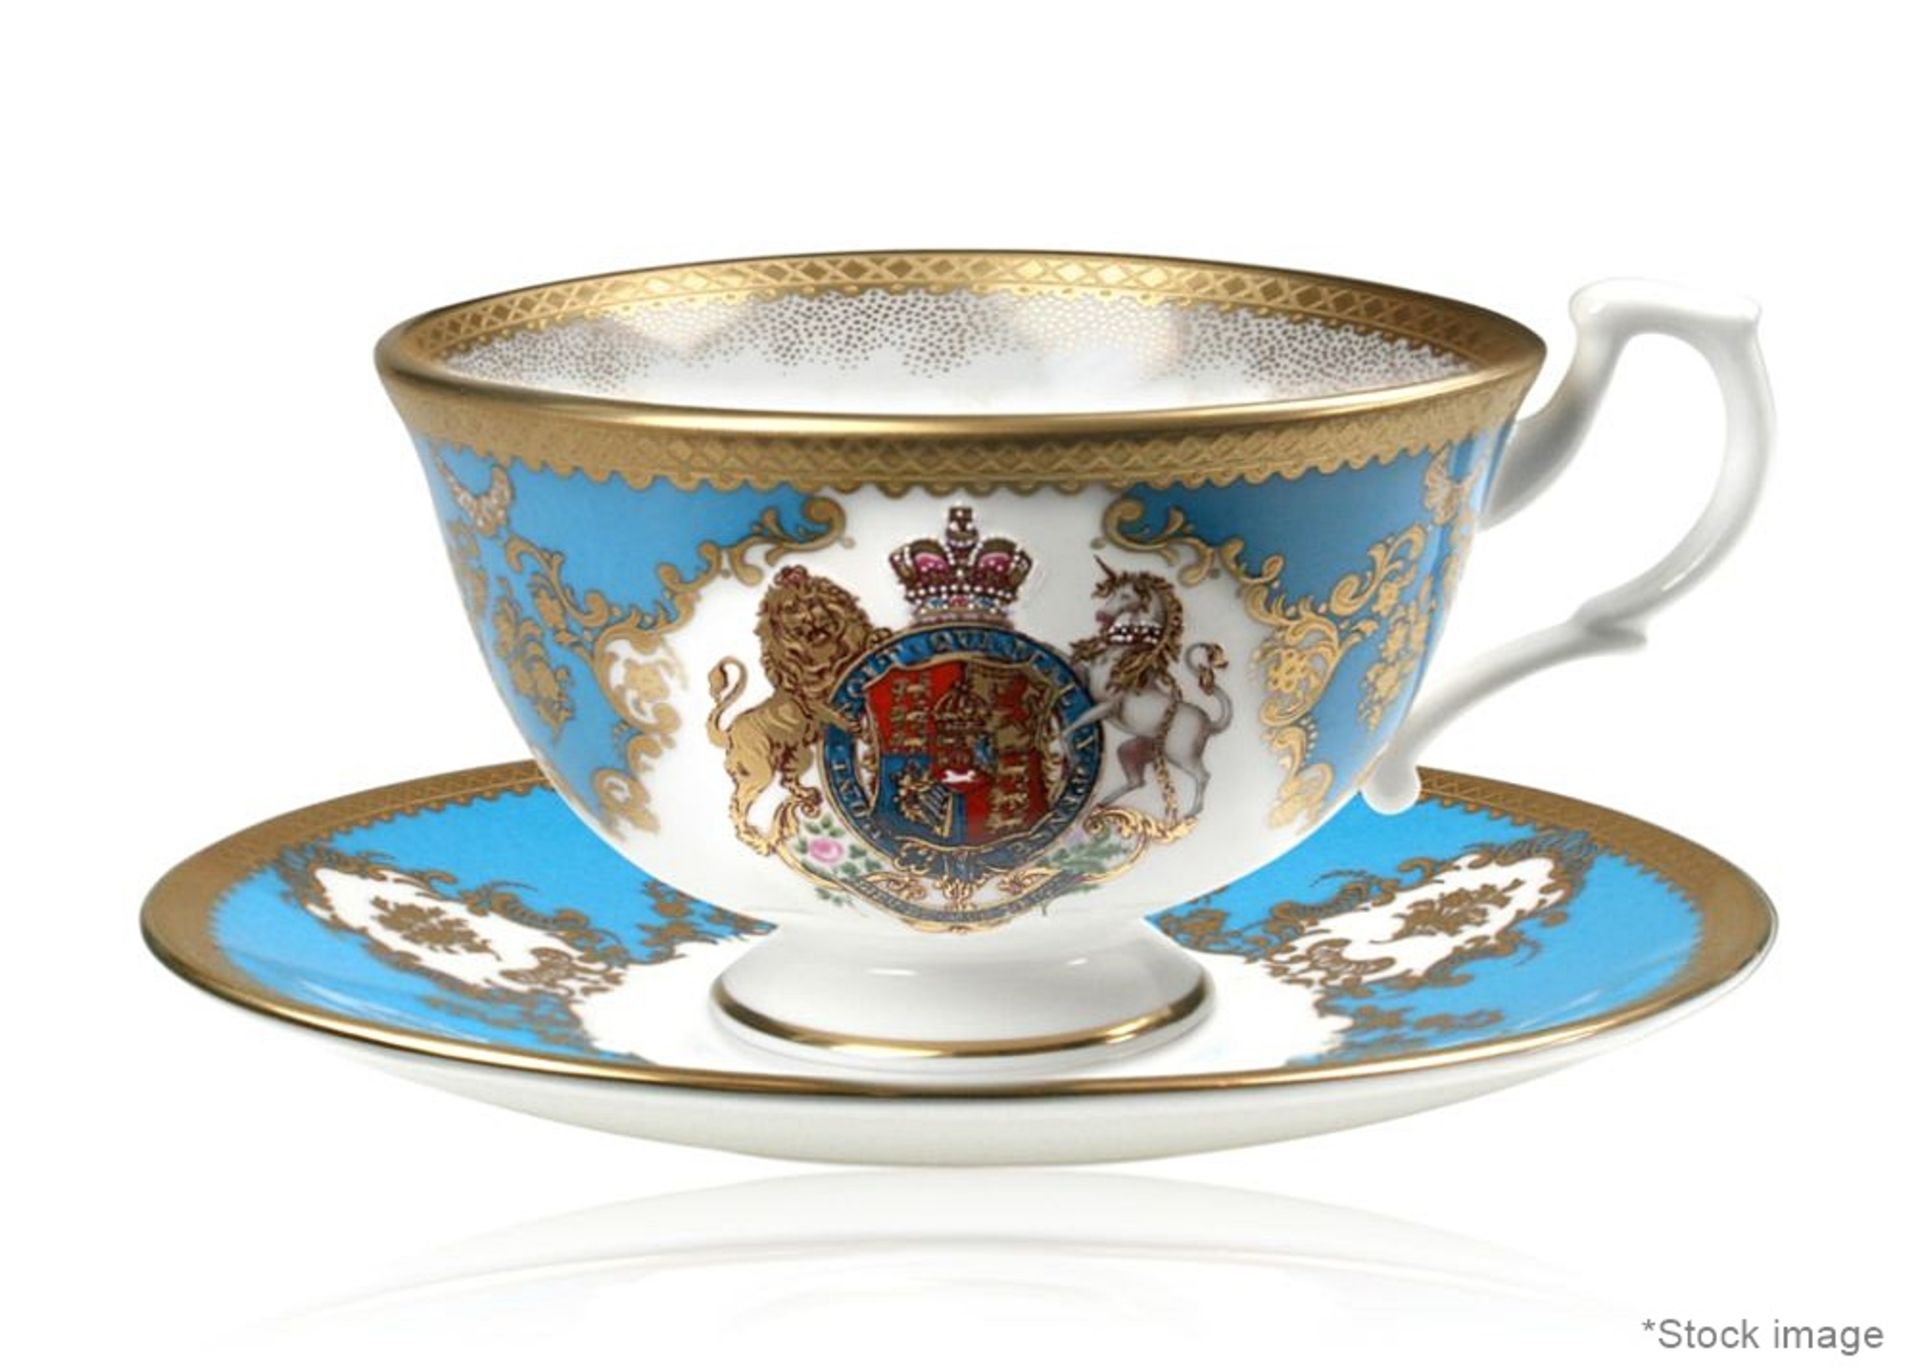 1 x ROYAL COLLECTION TRUST 'Coat of Arms' Fine Bone China Teacup and Saucer Set, Hand finished